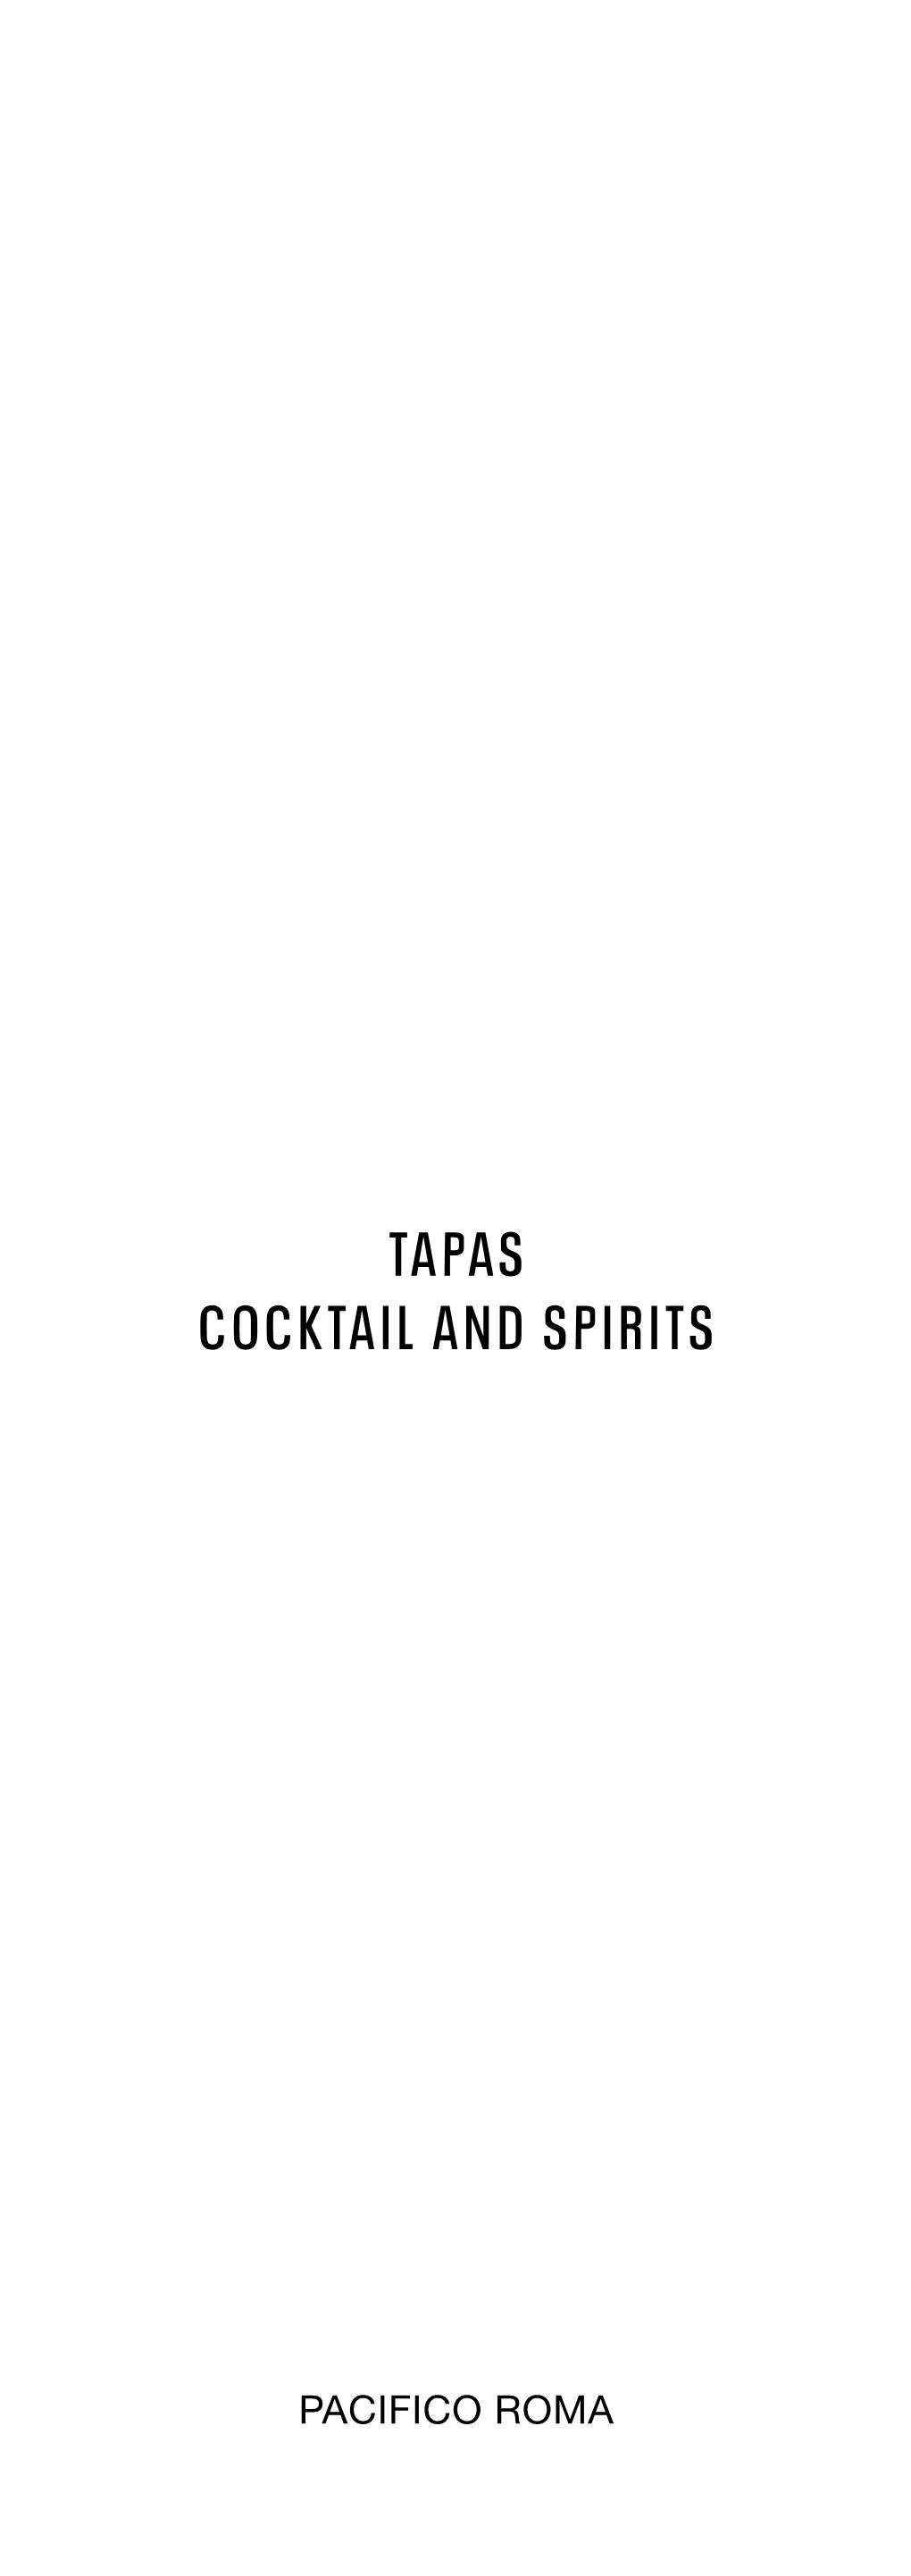 Cocktail and Spirits